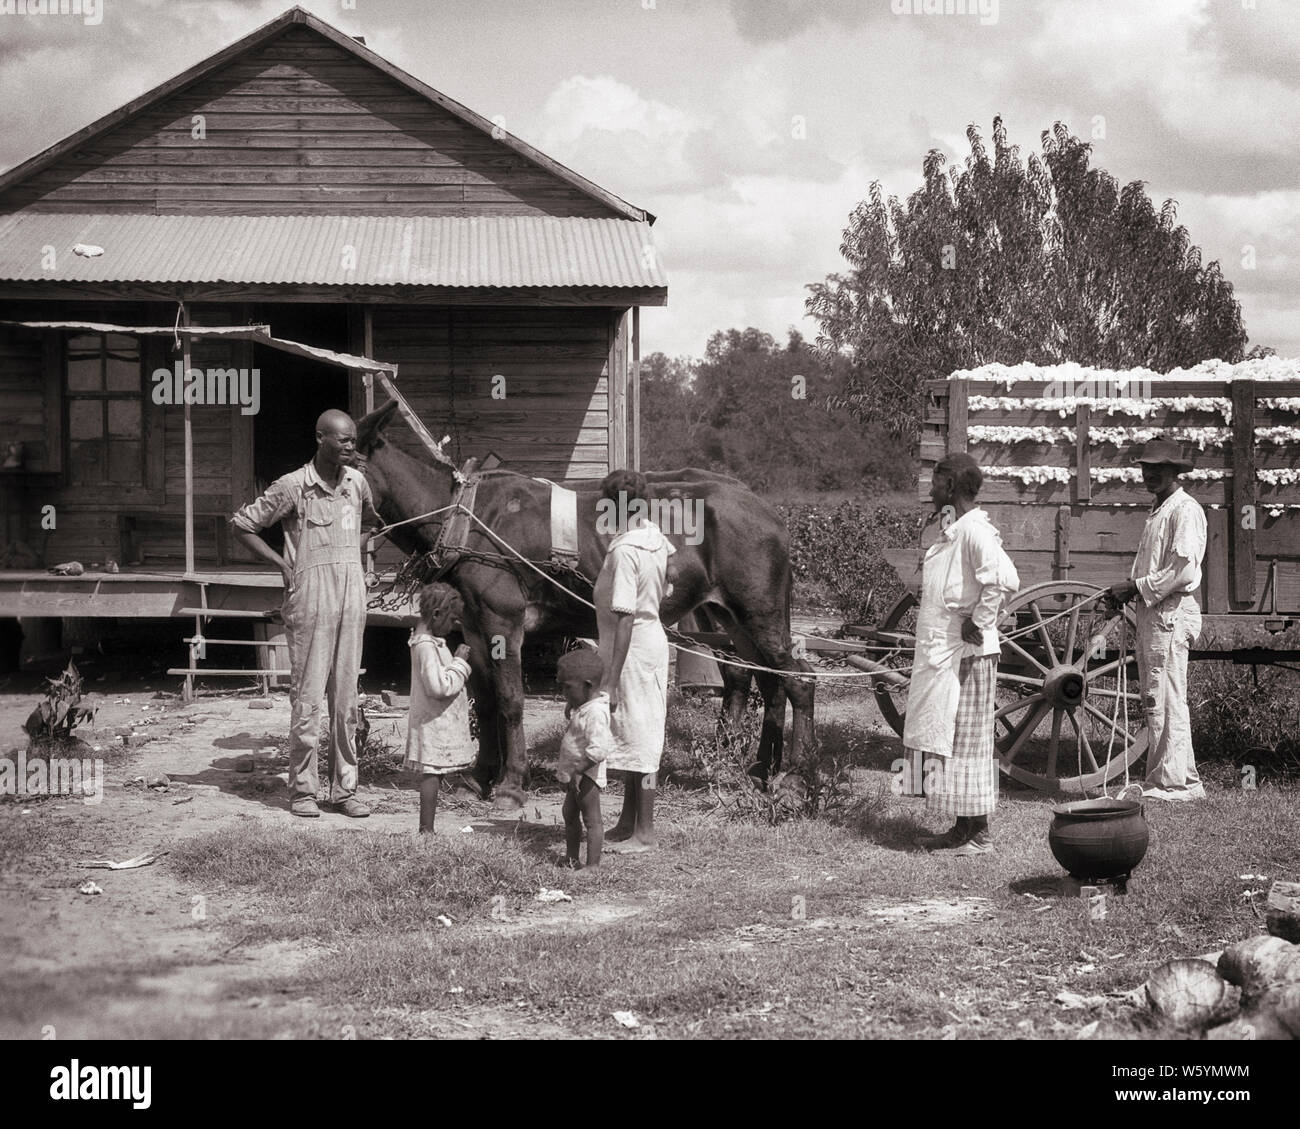 1930s AFRICAN AMERICAN SHARECROPPING TENANT FARM FAMILY OUTSIDE THEIR HOME WITH MULE DRAW WAGON OF PICKED COTTON MISSISSIPPI USA - c6256 HAR001 HARS NOSTALGIC BEAUTY COMMUNITY MOTHERS OLD TIME BUSY FUTURE NOSTALGIA BROTHER INDUSTRY OLD FASHION SISTER POVERTY 1 WAGON JUVENILE FEAR TEAMWORK COTTON SONS FAMILIES JOY LIFESTYLE CELEBRATION FEMALES HOUSES MARRIED BROTHERS POOR RURAL SPOUSE HUSBANDS HOME LIFE 6 COPY SPACE FULL-LENGTH LADIES DAUGHTERS PERSONS RESIDENTIAL MALES RISK SIX BUILDINGS SERENITY SIBLINGS SPIRITUALITY CONFIDENCE SISTERS TRANSPORTATION DRAW FATHERS AGRICULTURE B&W PARTNER Stock Photo